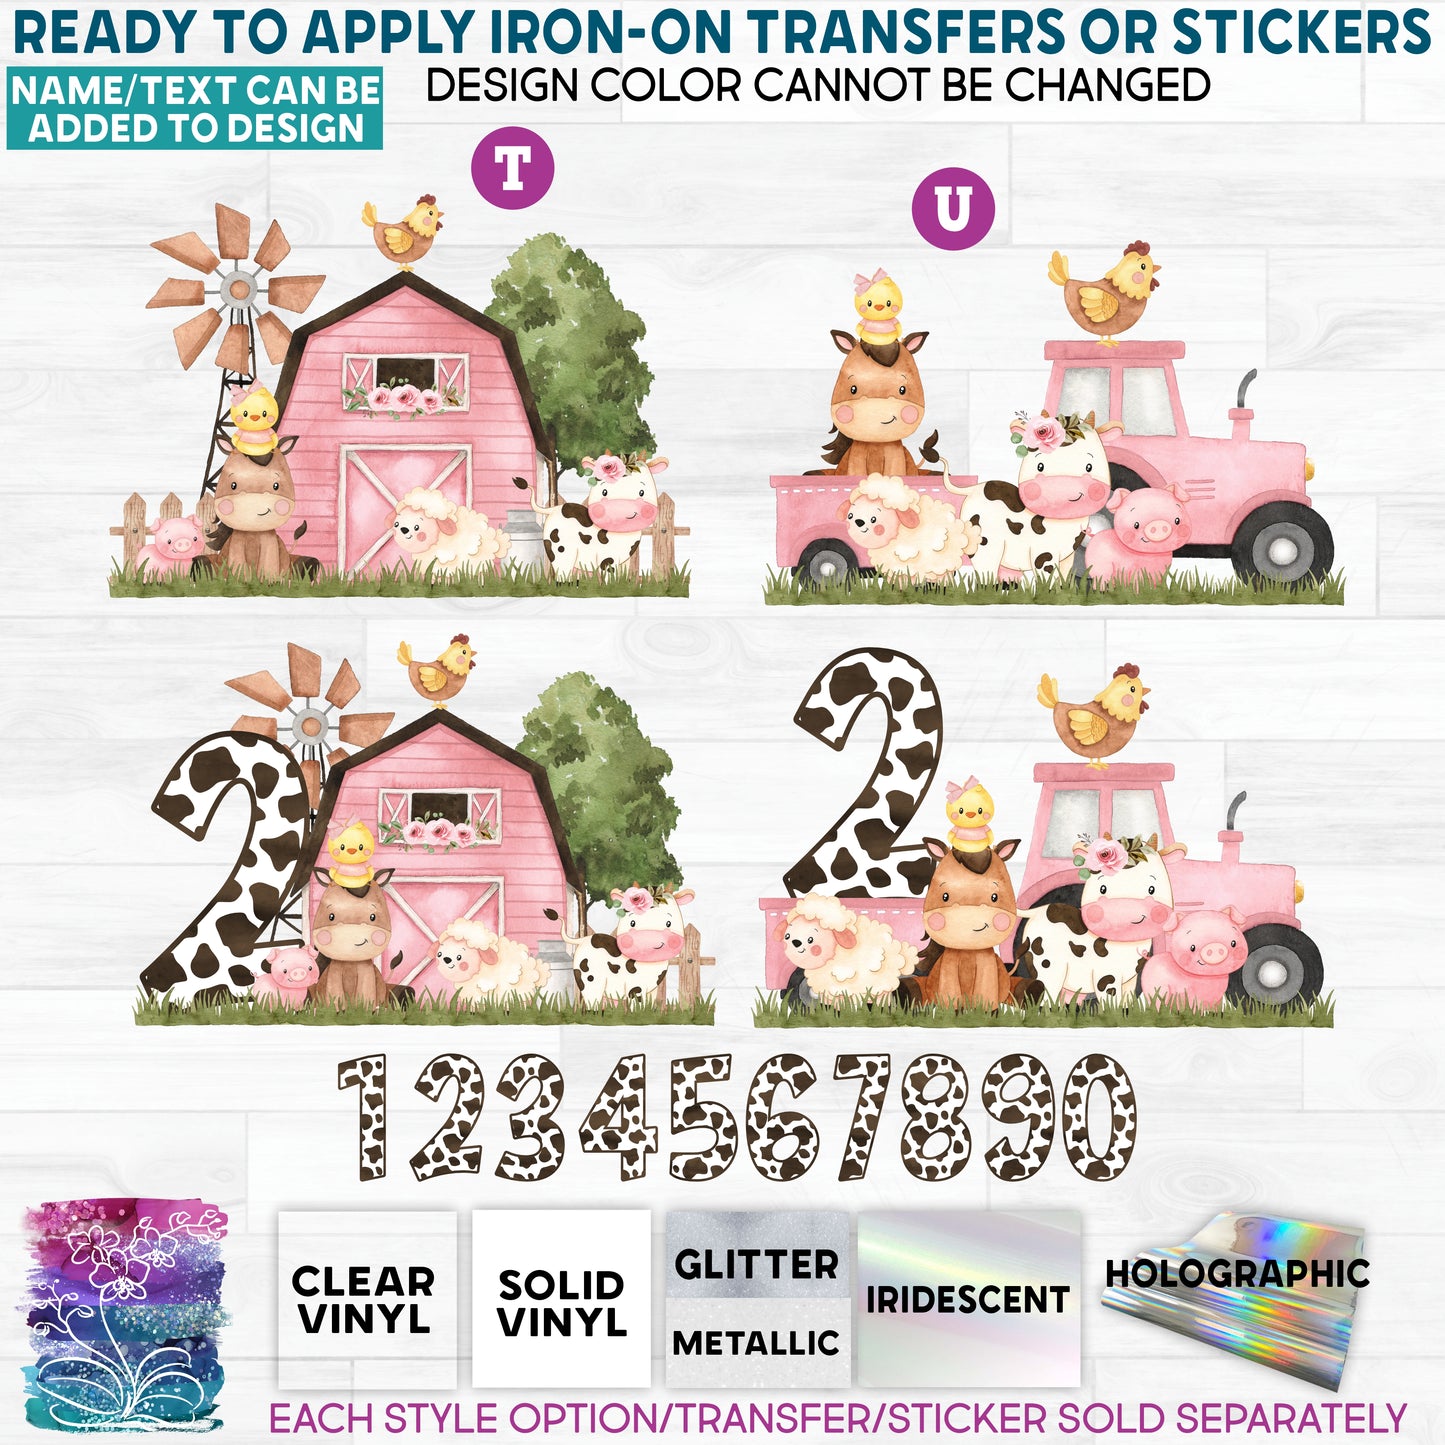 (s003-16) Cute Baby Watercolor Farm Animals Pink Barn Tractor Glitter or Vinyl Iron-On Transfer or Sticker